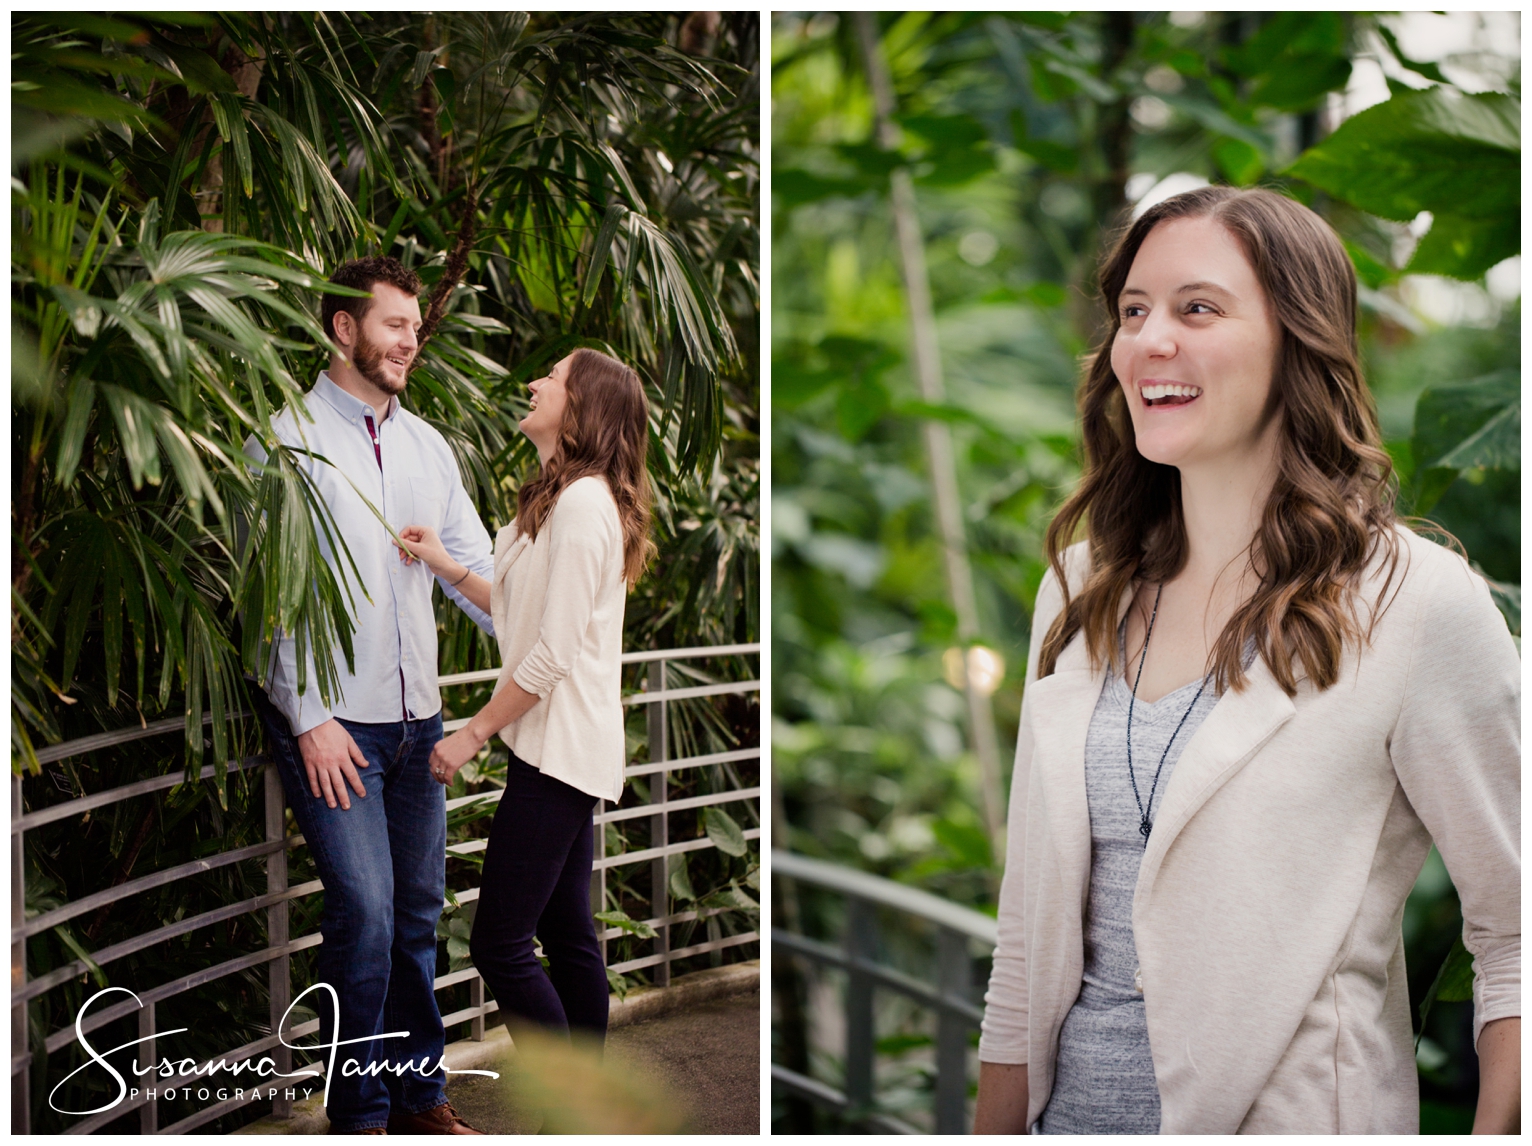 Cincinnati Krohn Conservatory Engagement Photography, portrait of engaged woman, another shot of couple sharing in a laugh surrounded by plants while leaning on railing